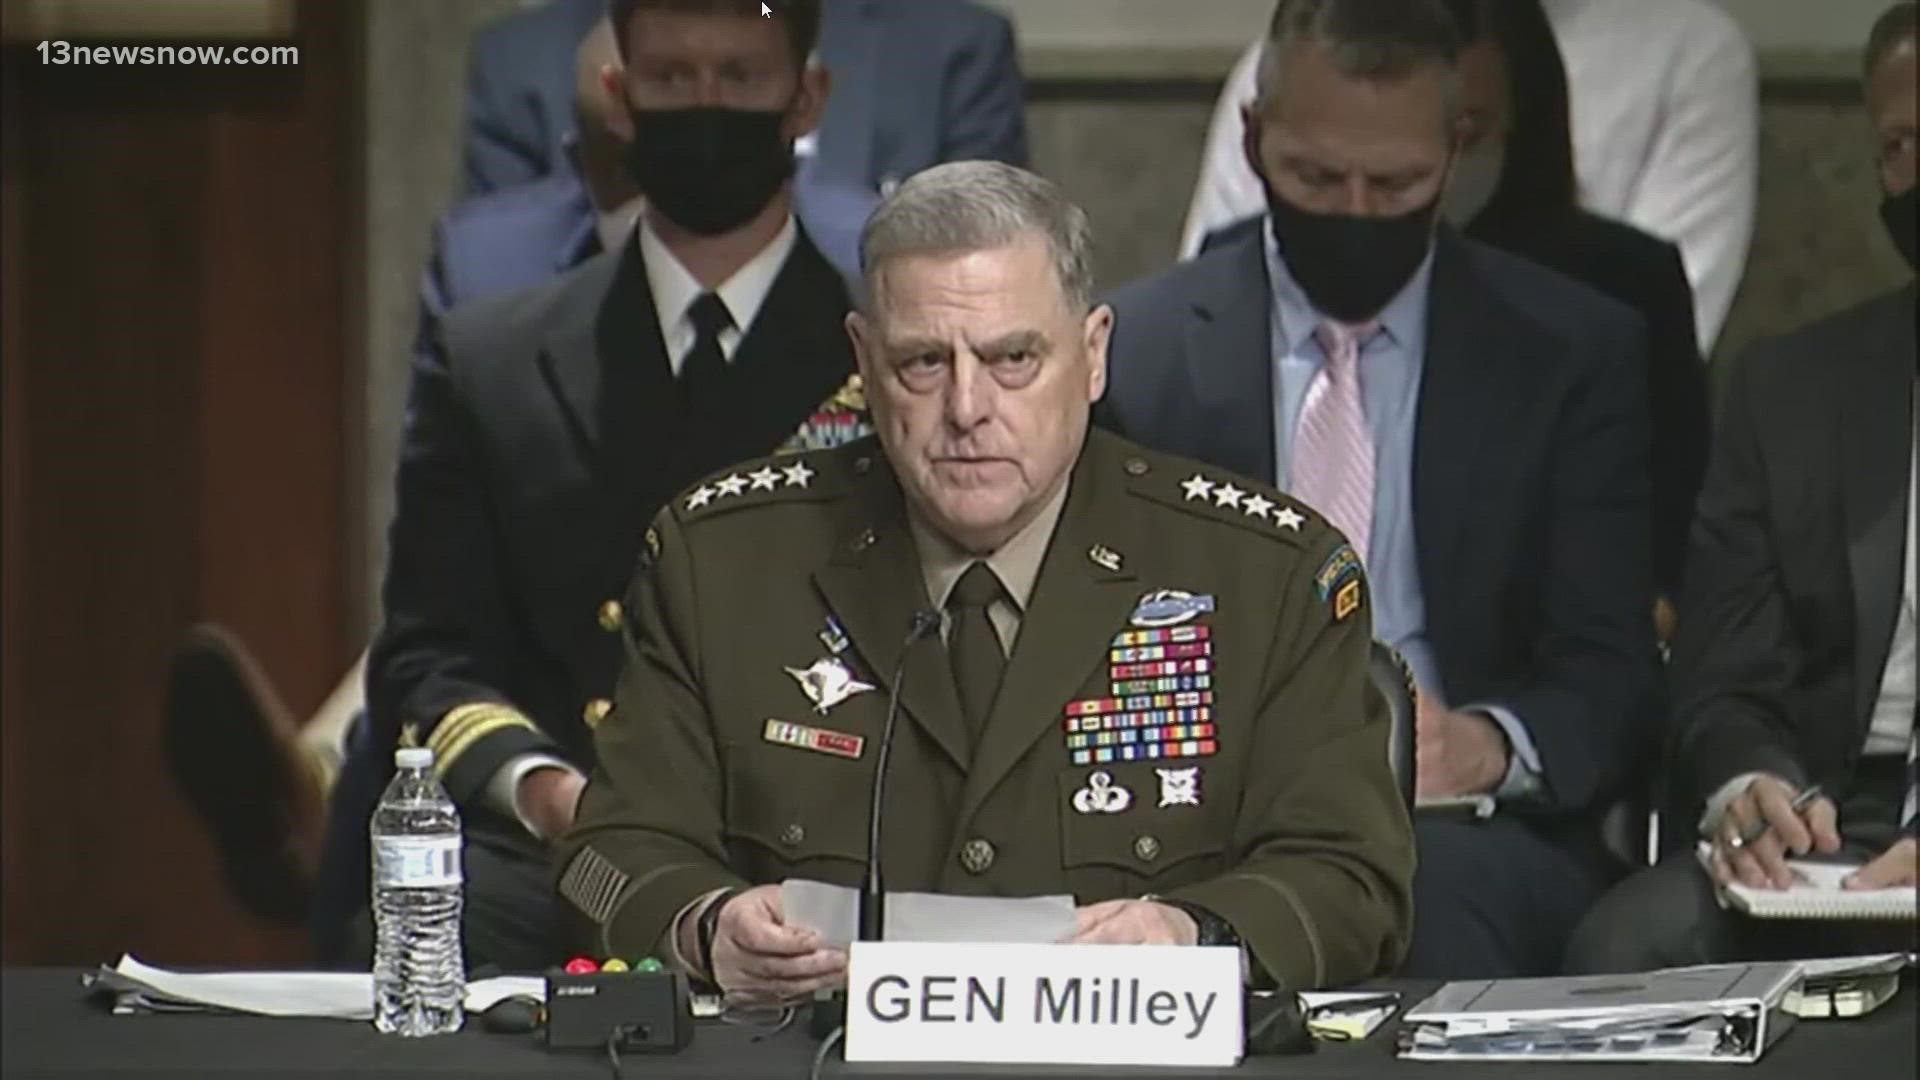 Today, on Capitol Hill, Secretary of Defense Lloyd Austin and Joint Chiefs Chairman Mark Milley testified about the withdrawal under oath for the first time.